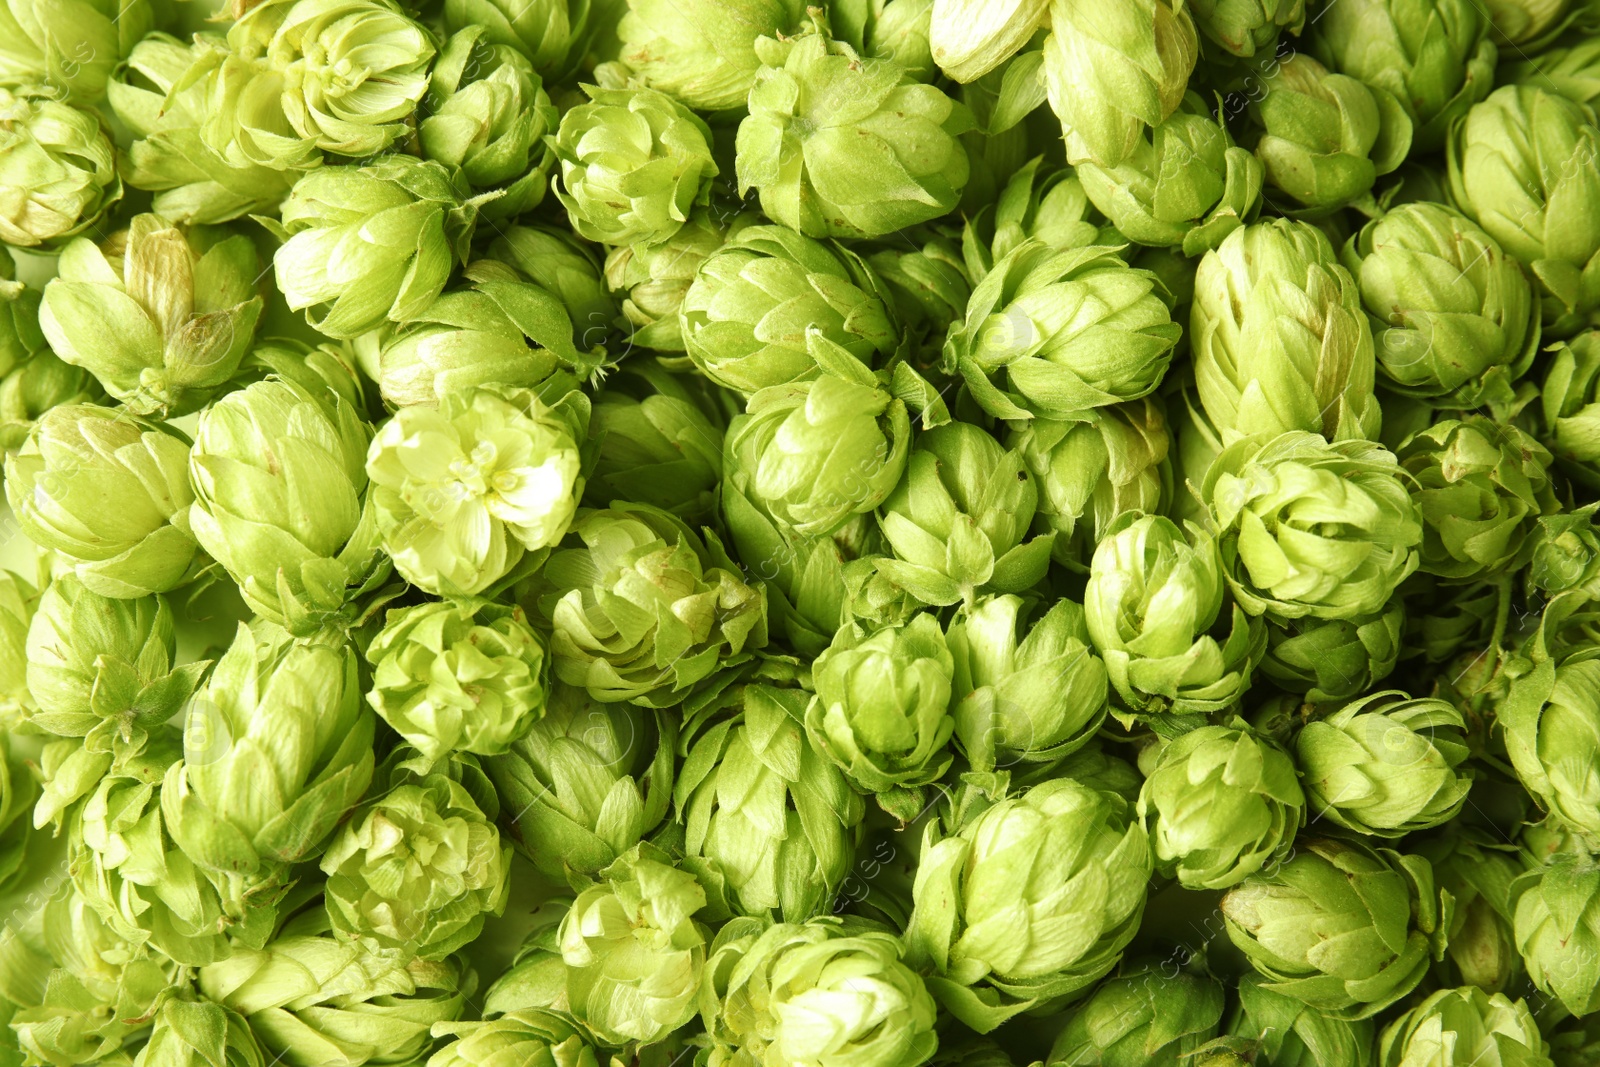 Photo of Fresh green hops as background. Beer production